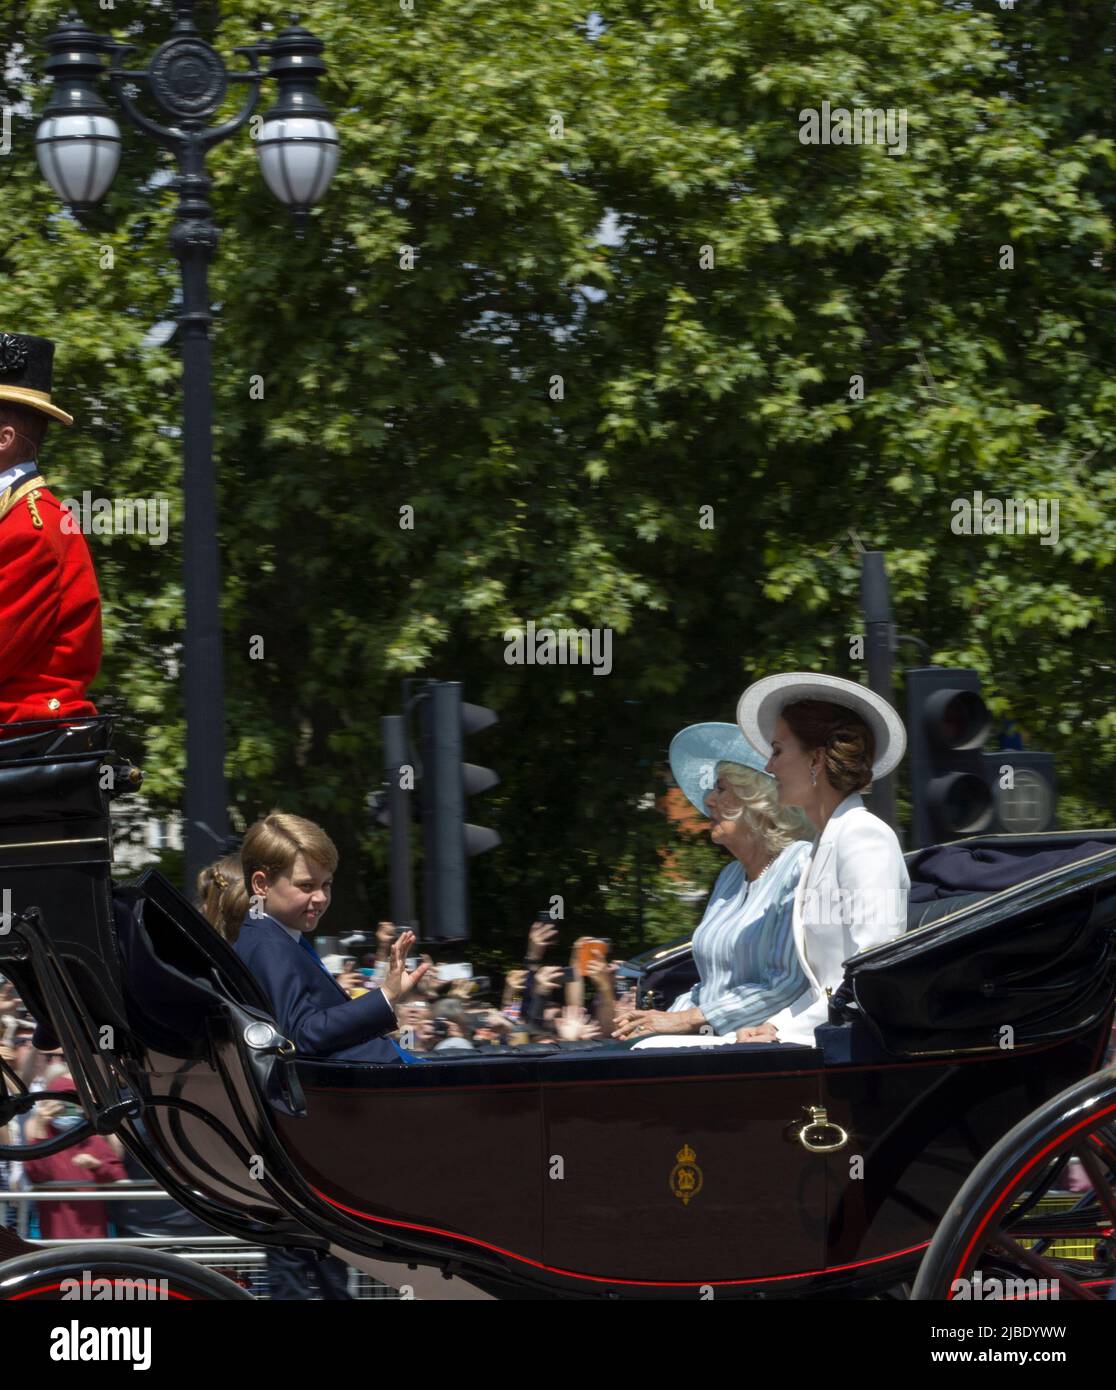 Prince George of Cambridge Catherine Middleton, Princess of Wales, Camilla Parker Bowles, The Queen's Platinum Jubilee Trooping The Color Colour Mall Stock Photo